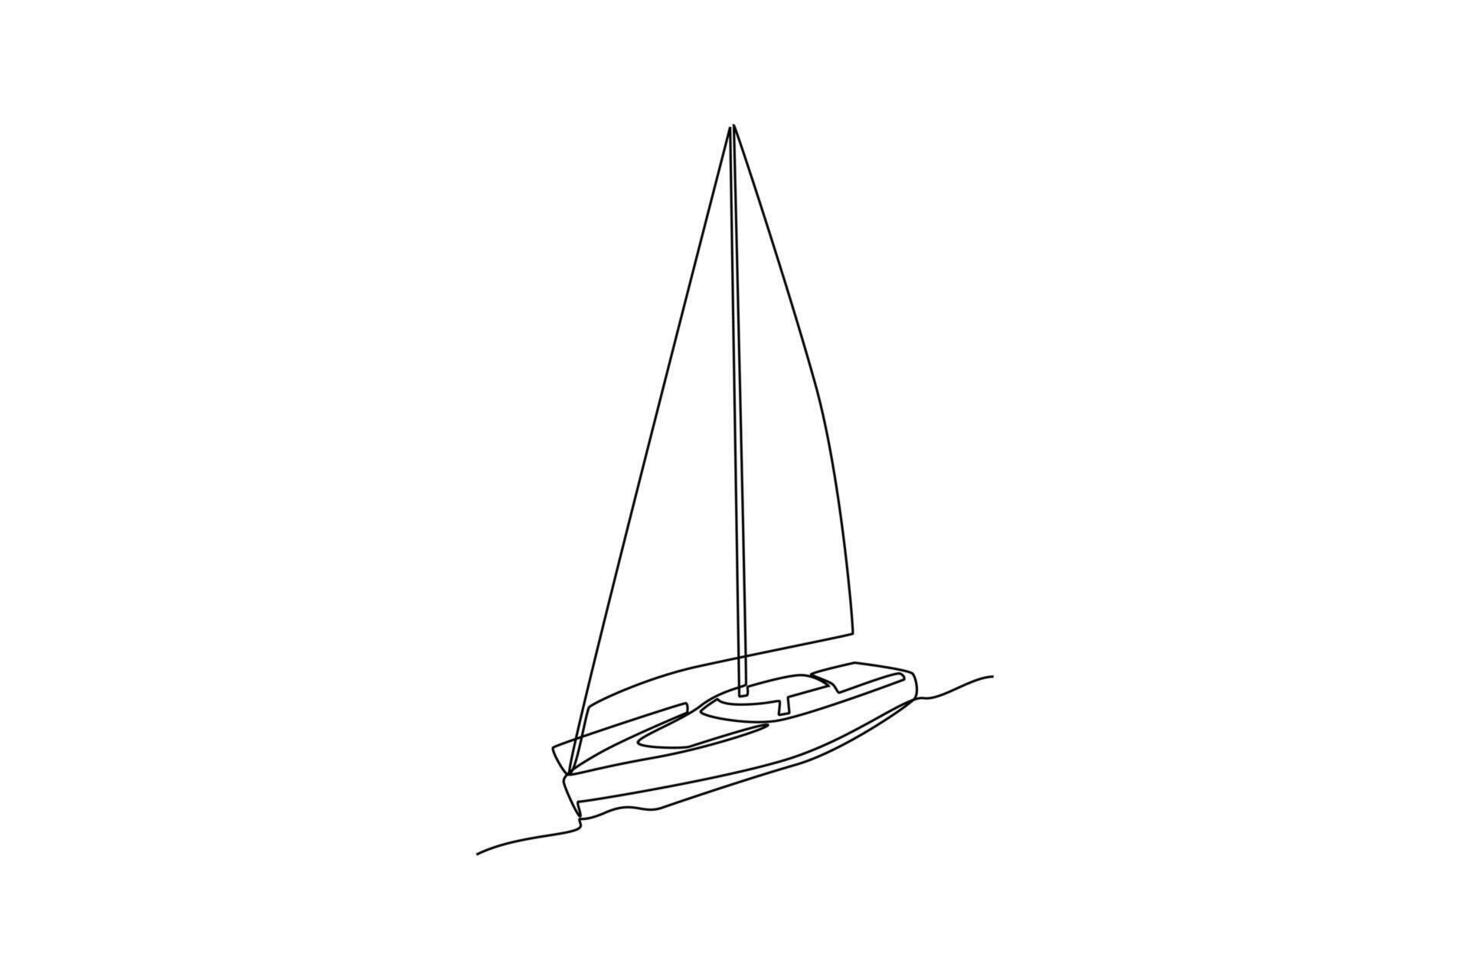 One continuous line drawing of Sea transportation concept. Doodle vector illustration in simple linear style.